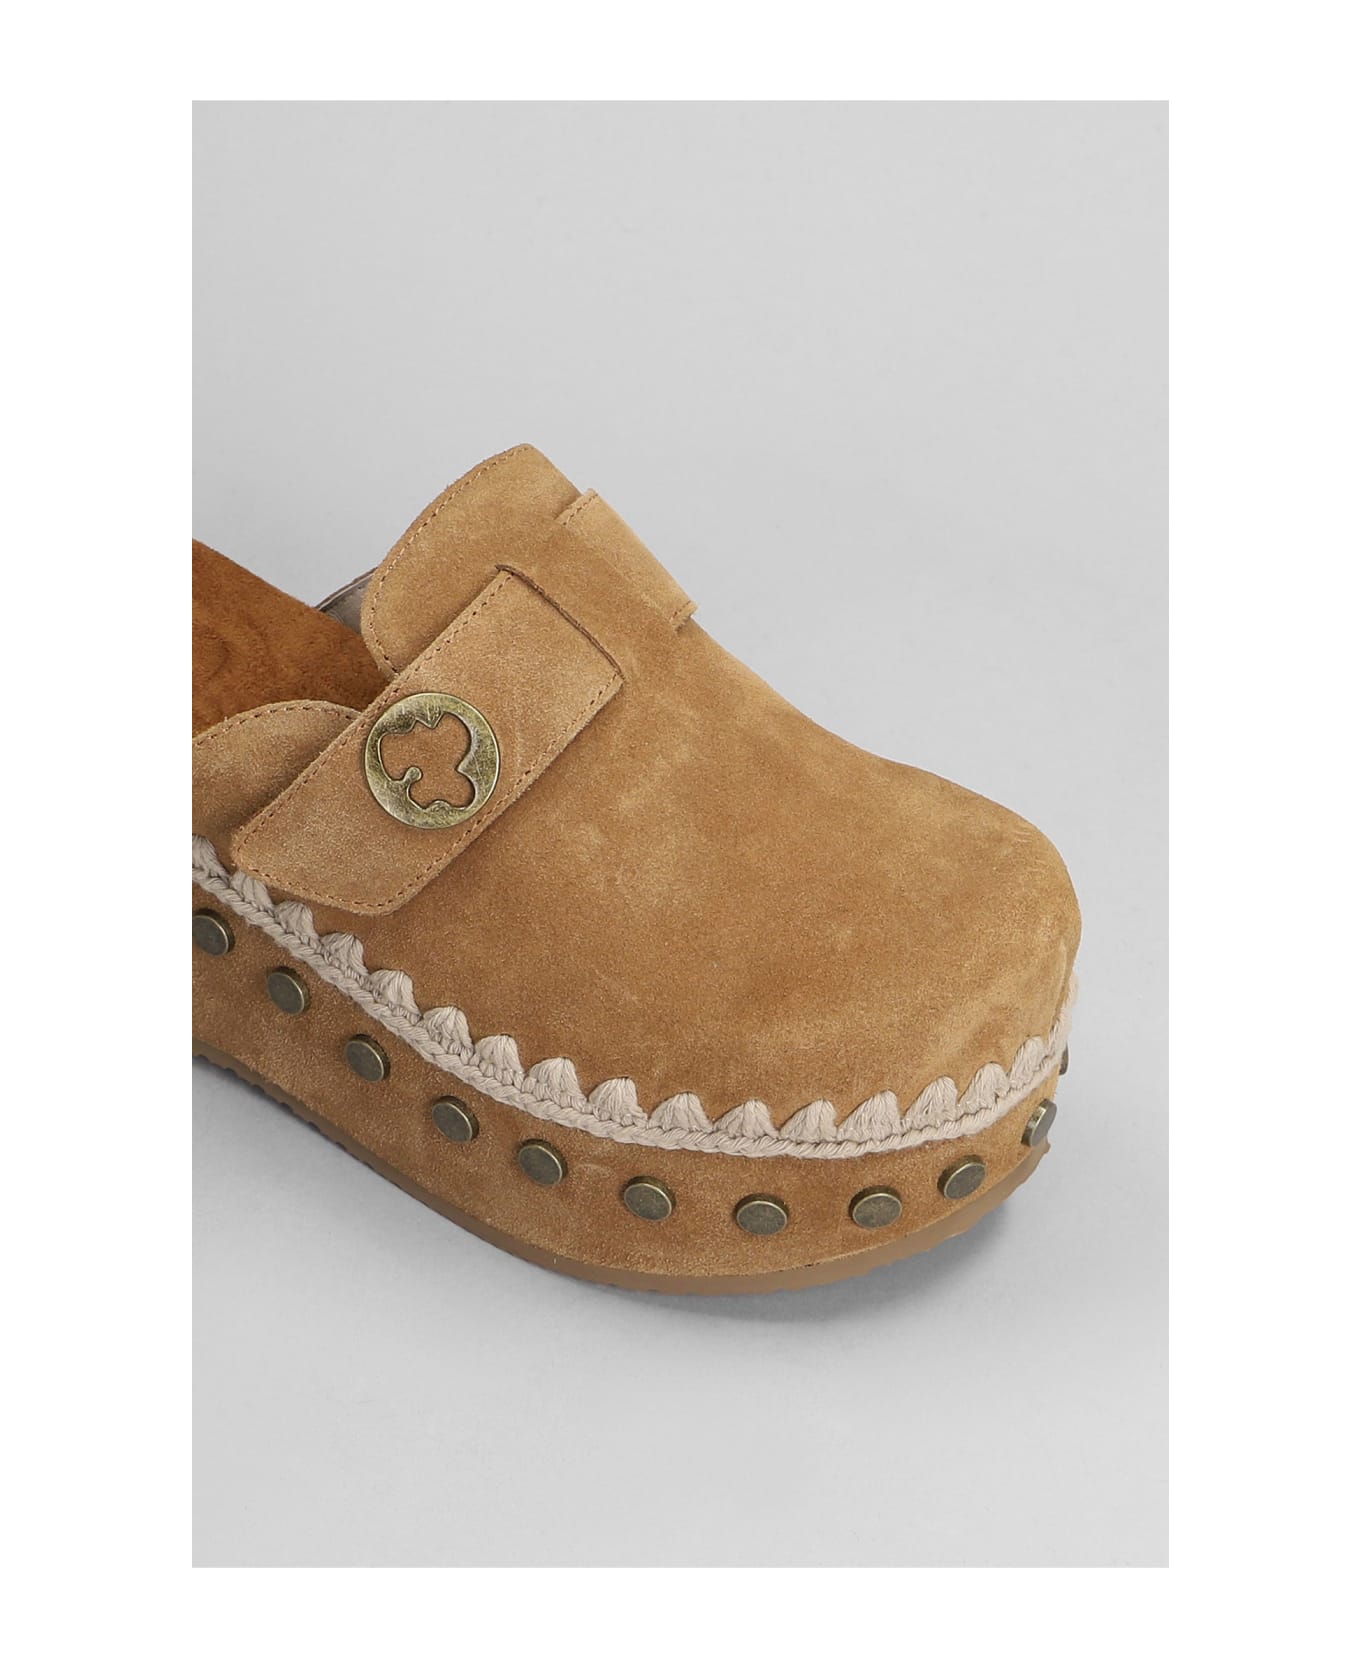 Mou Clog Slipper-mule In Leather Color Suede - Cog